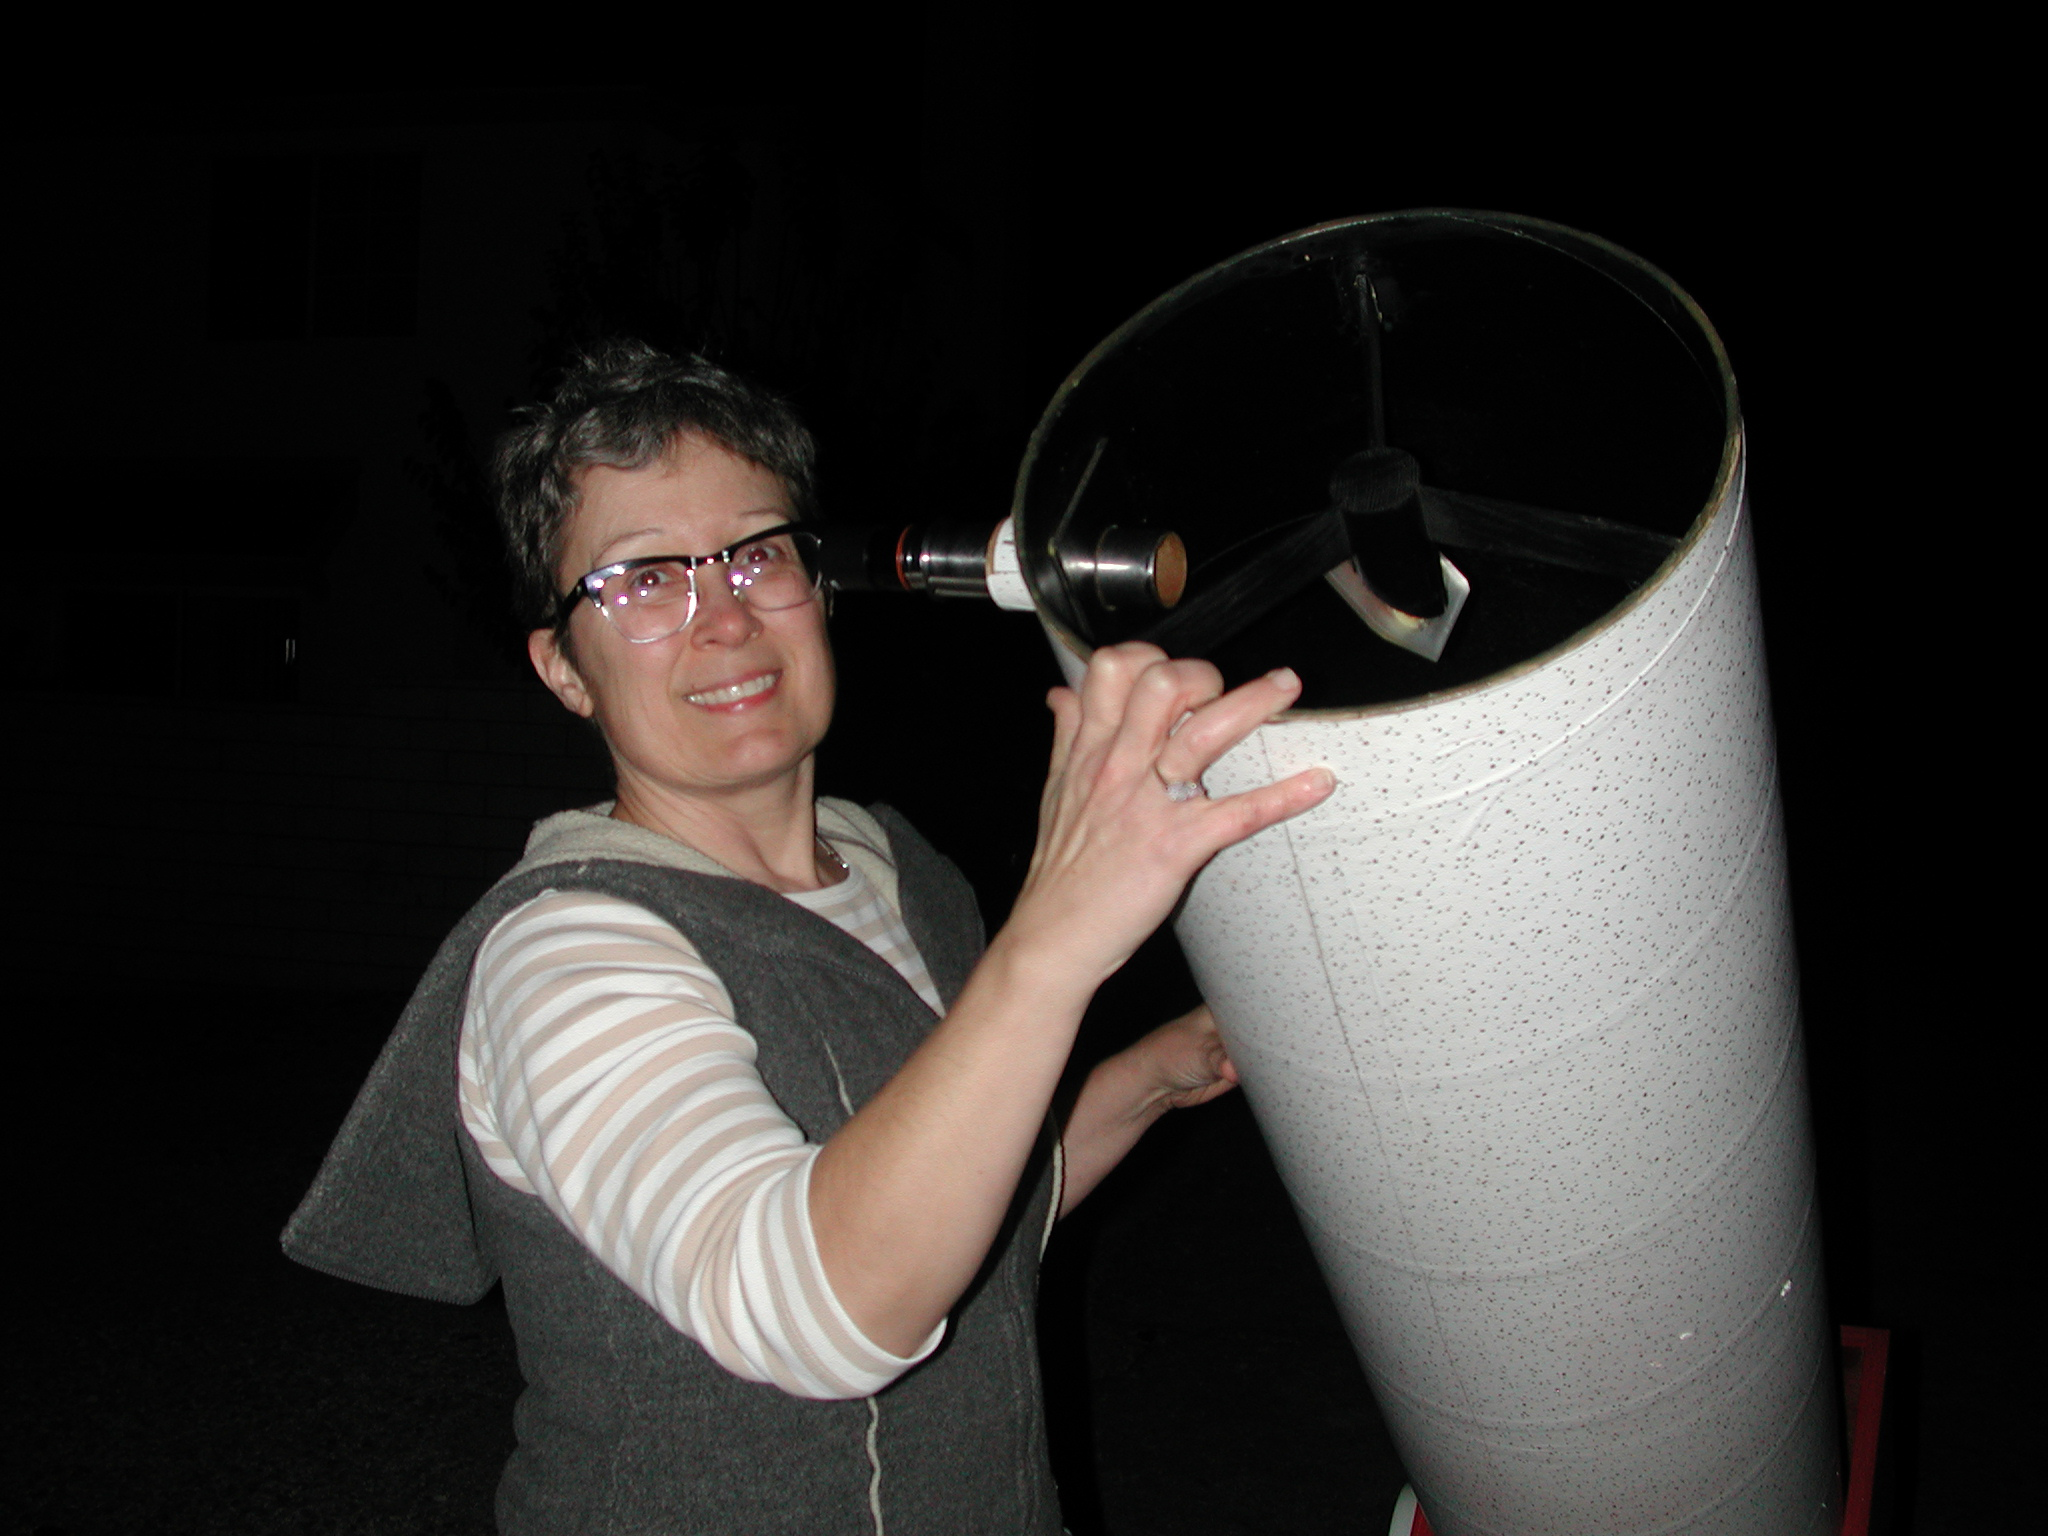 A woman holding up one end of a homemade telescope